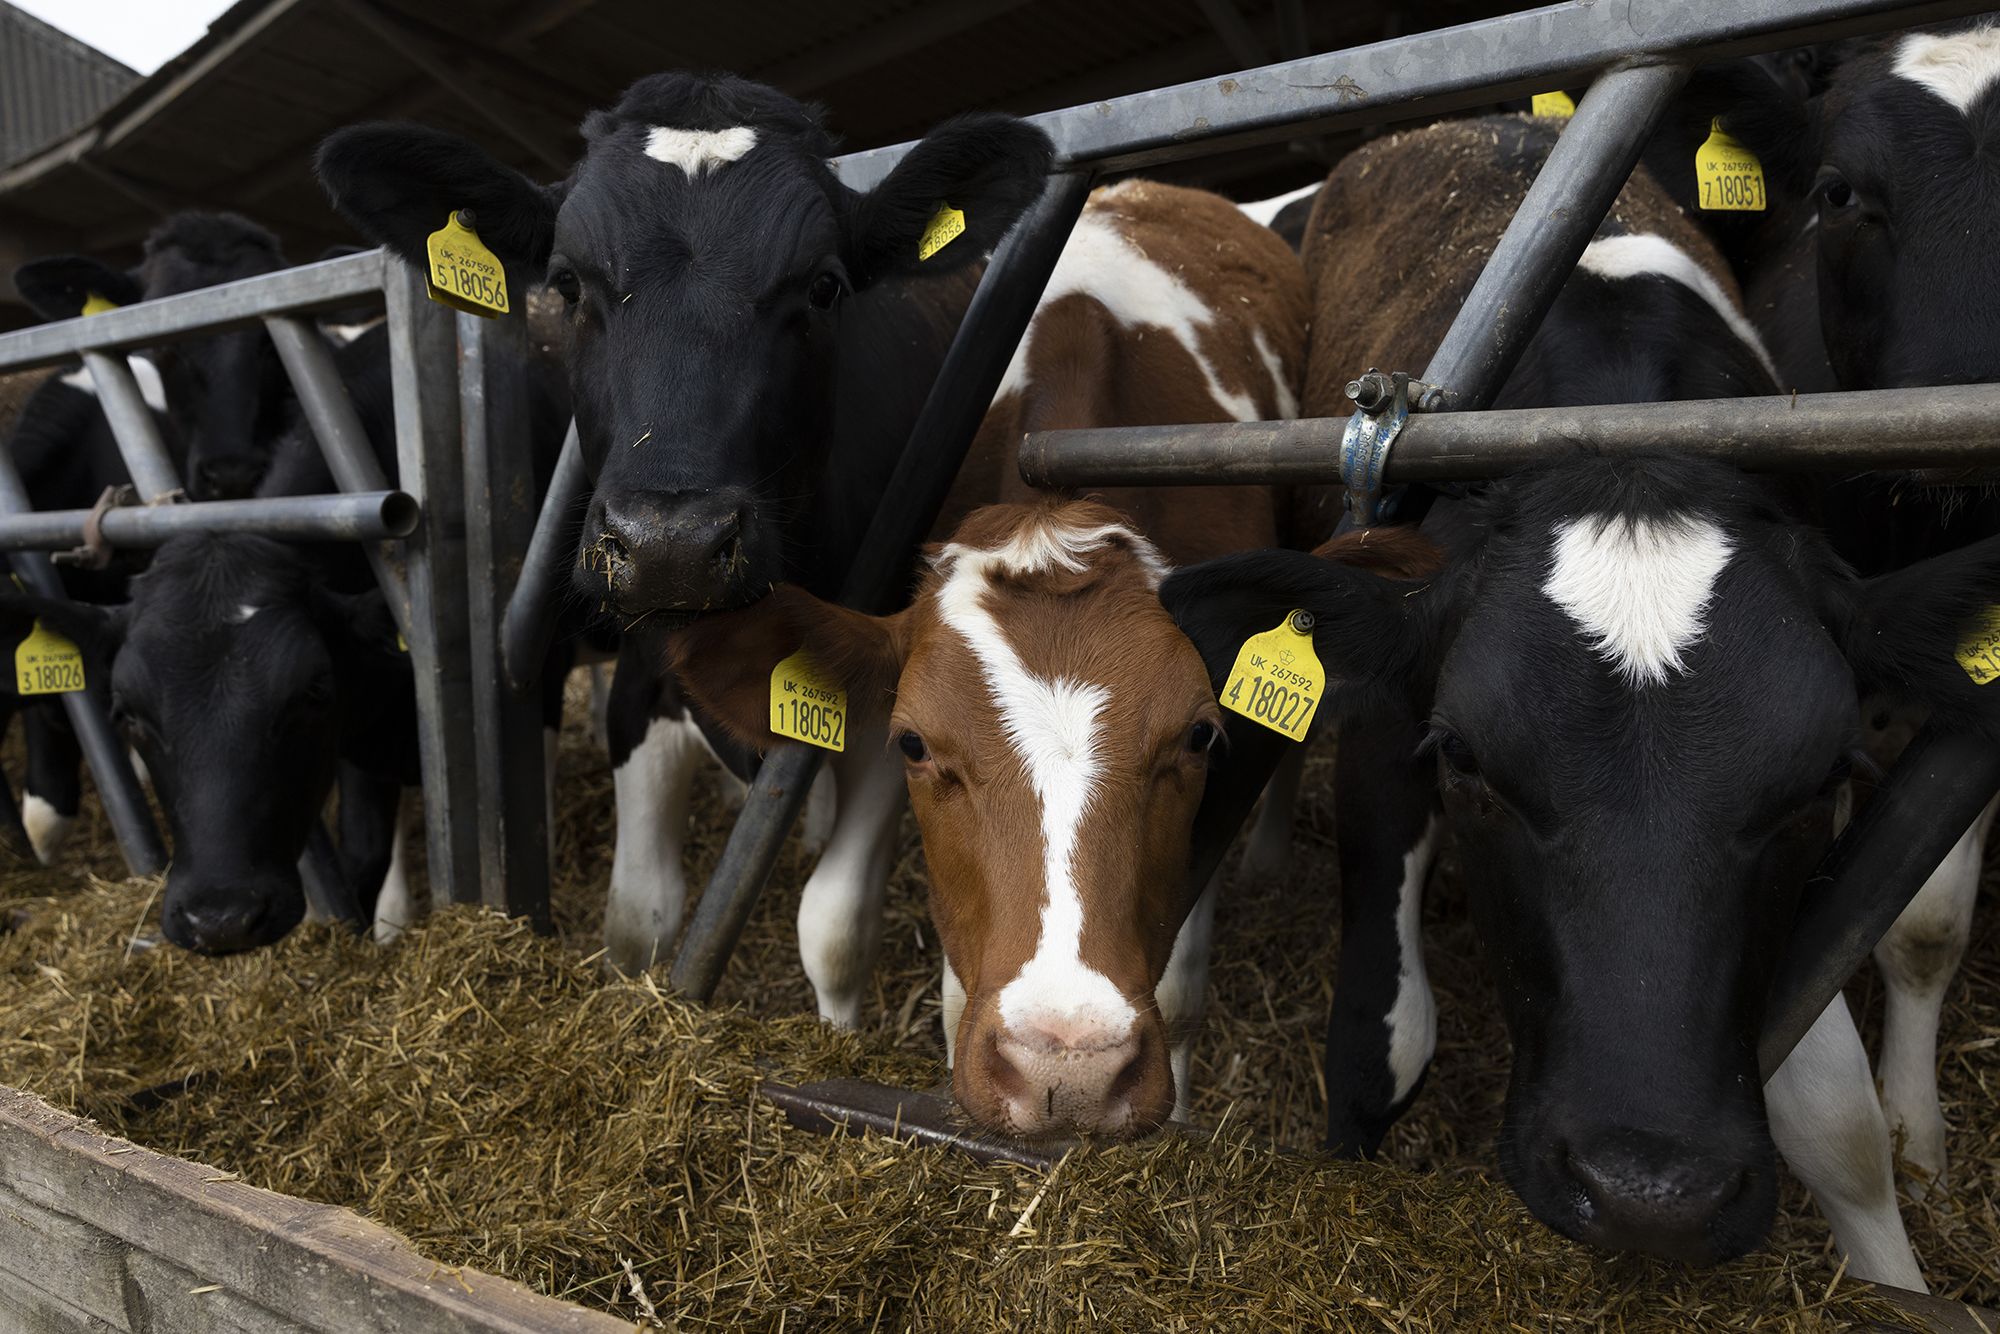 Milk prices: Why you could be paying 50% more this year